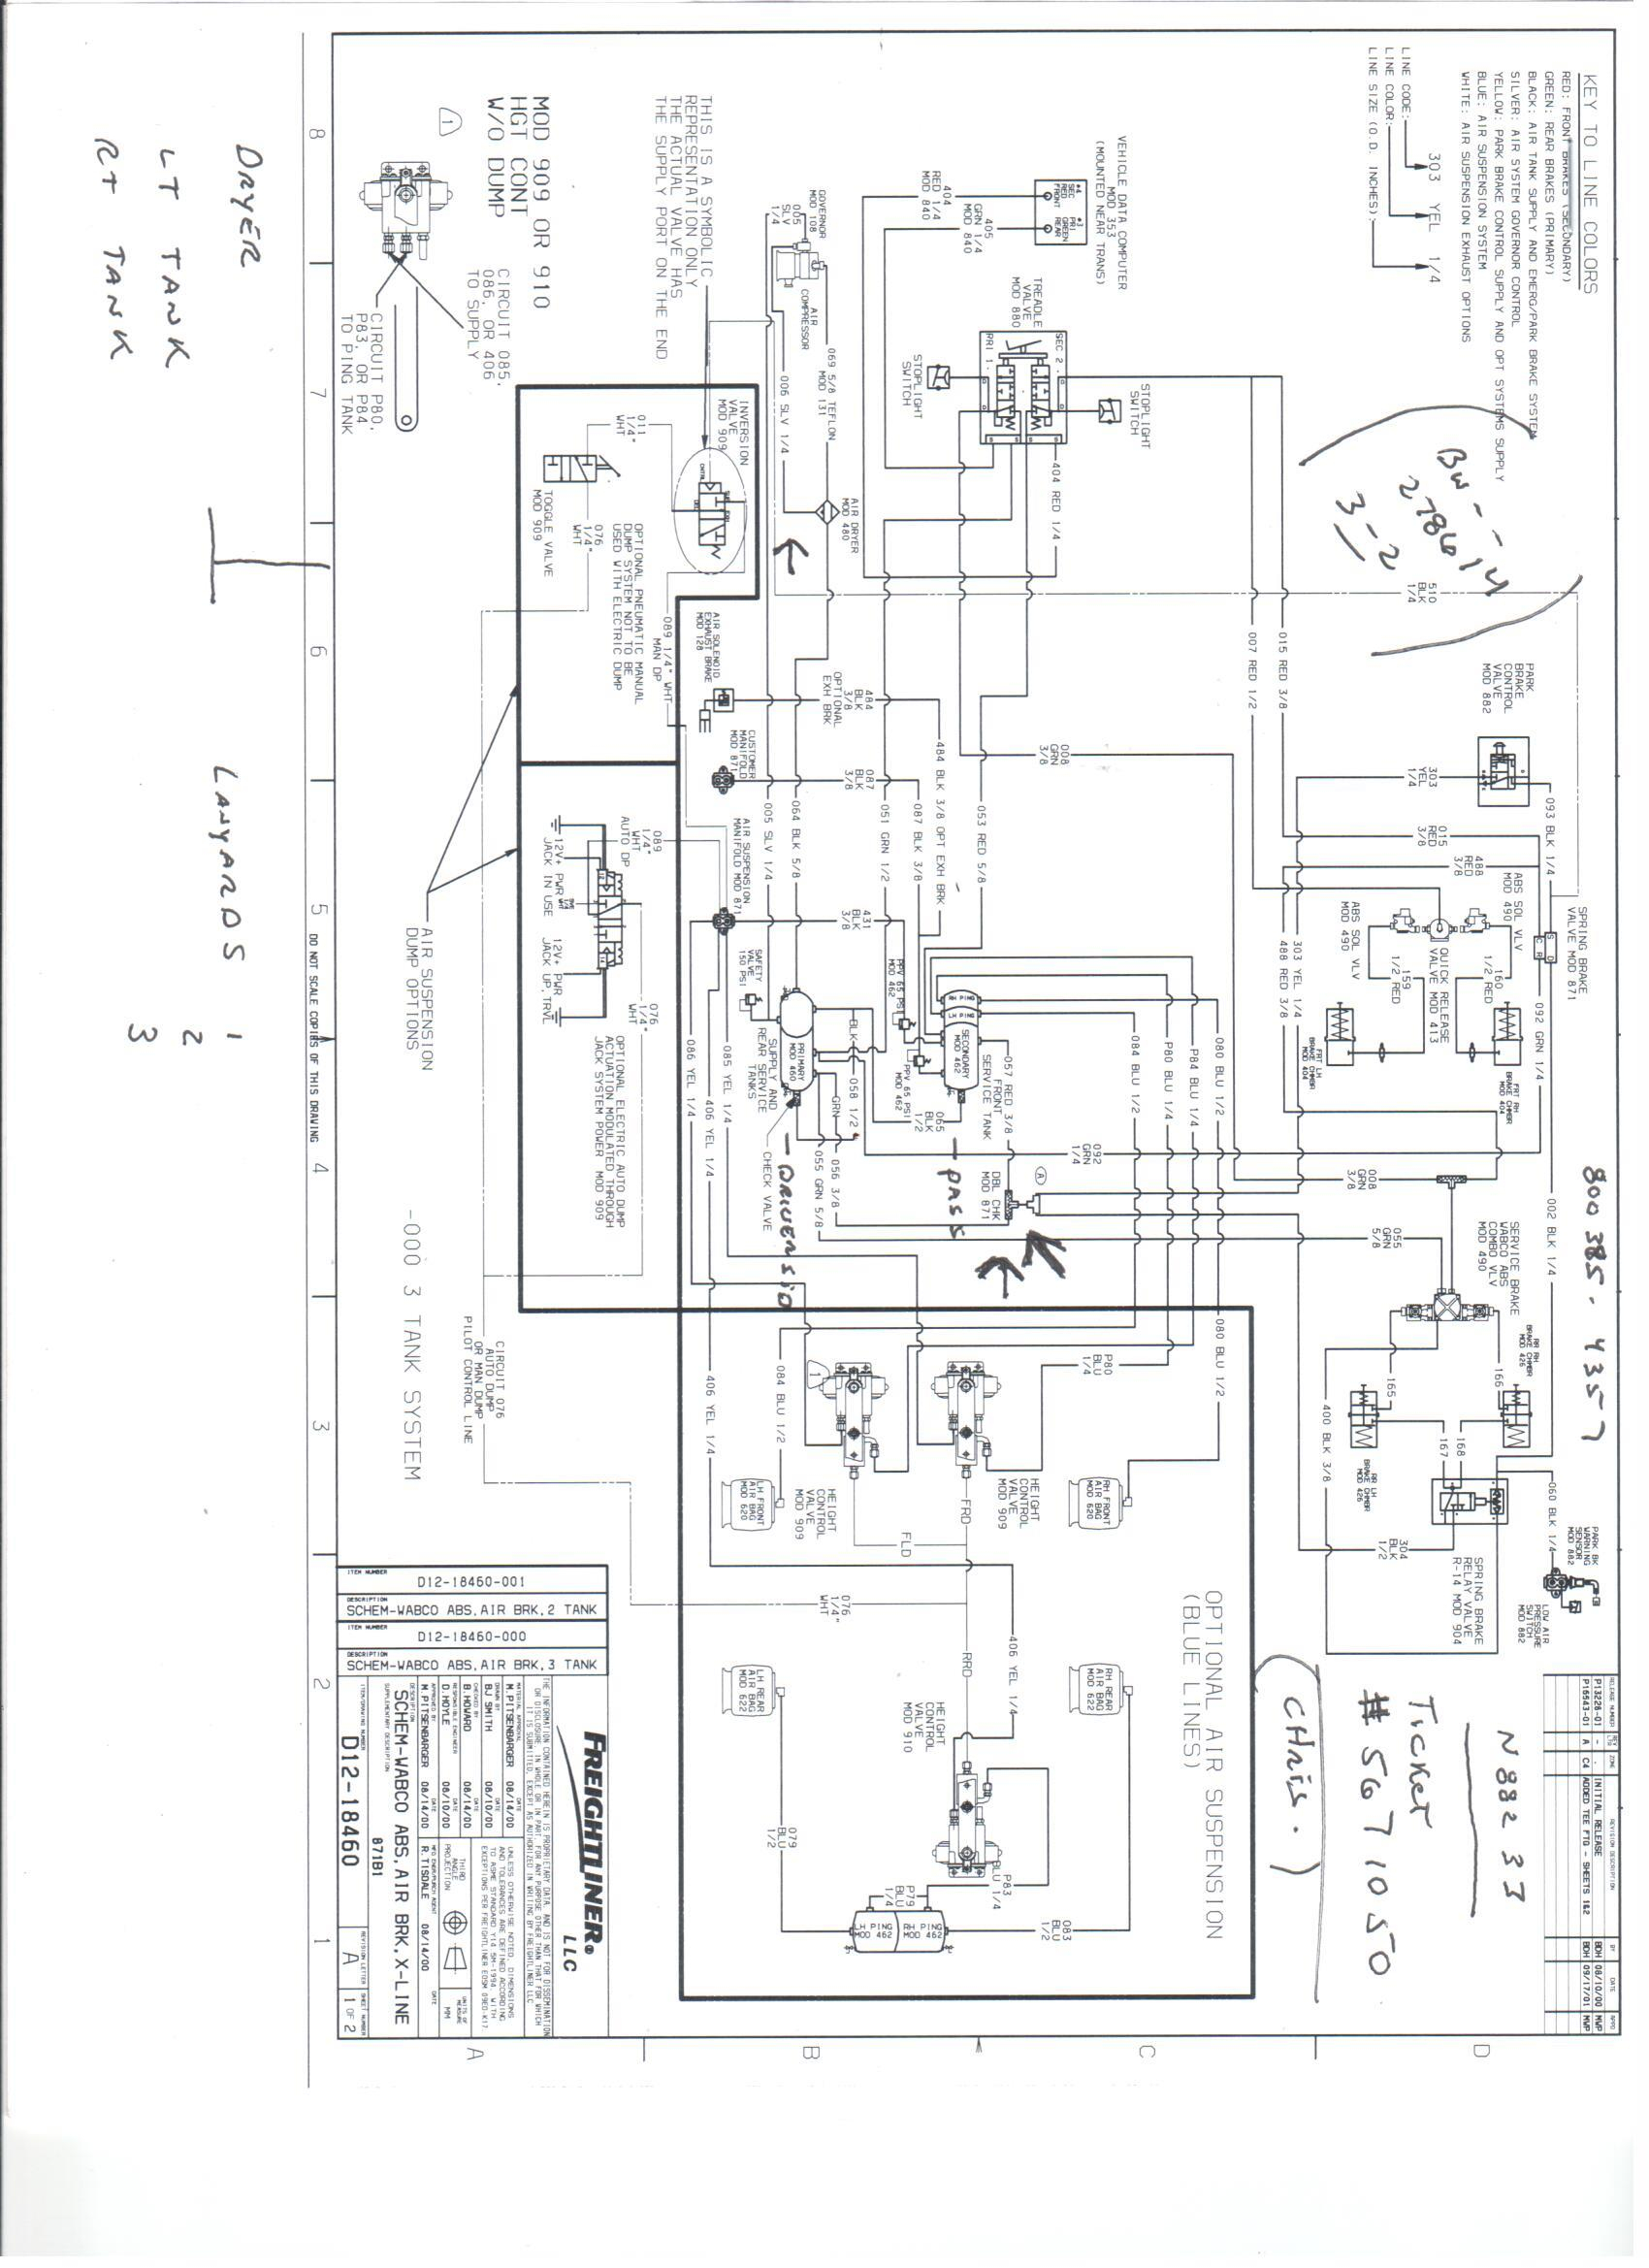 Freightliner Chassis Wiring Diagram 2000 Freightliner Chassis Rv Wiring Diagram Wiring Diagrams Home